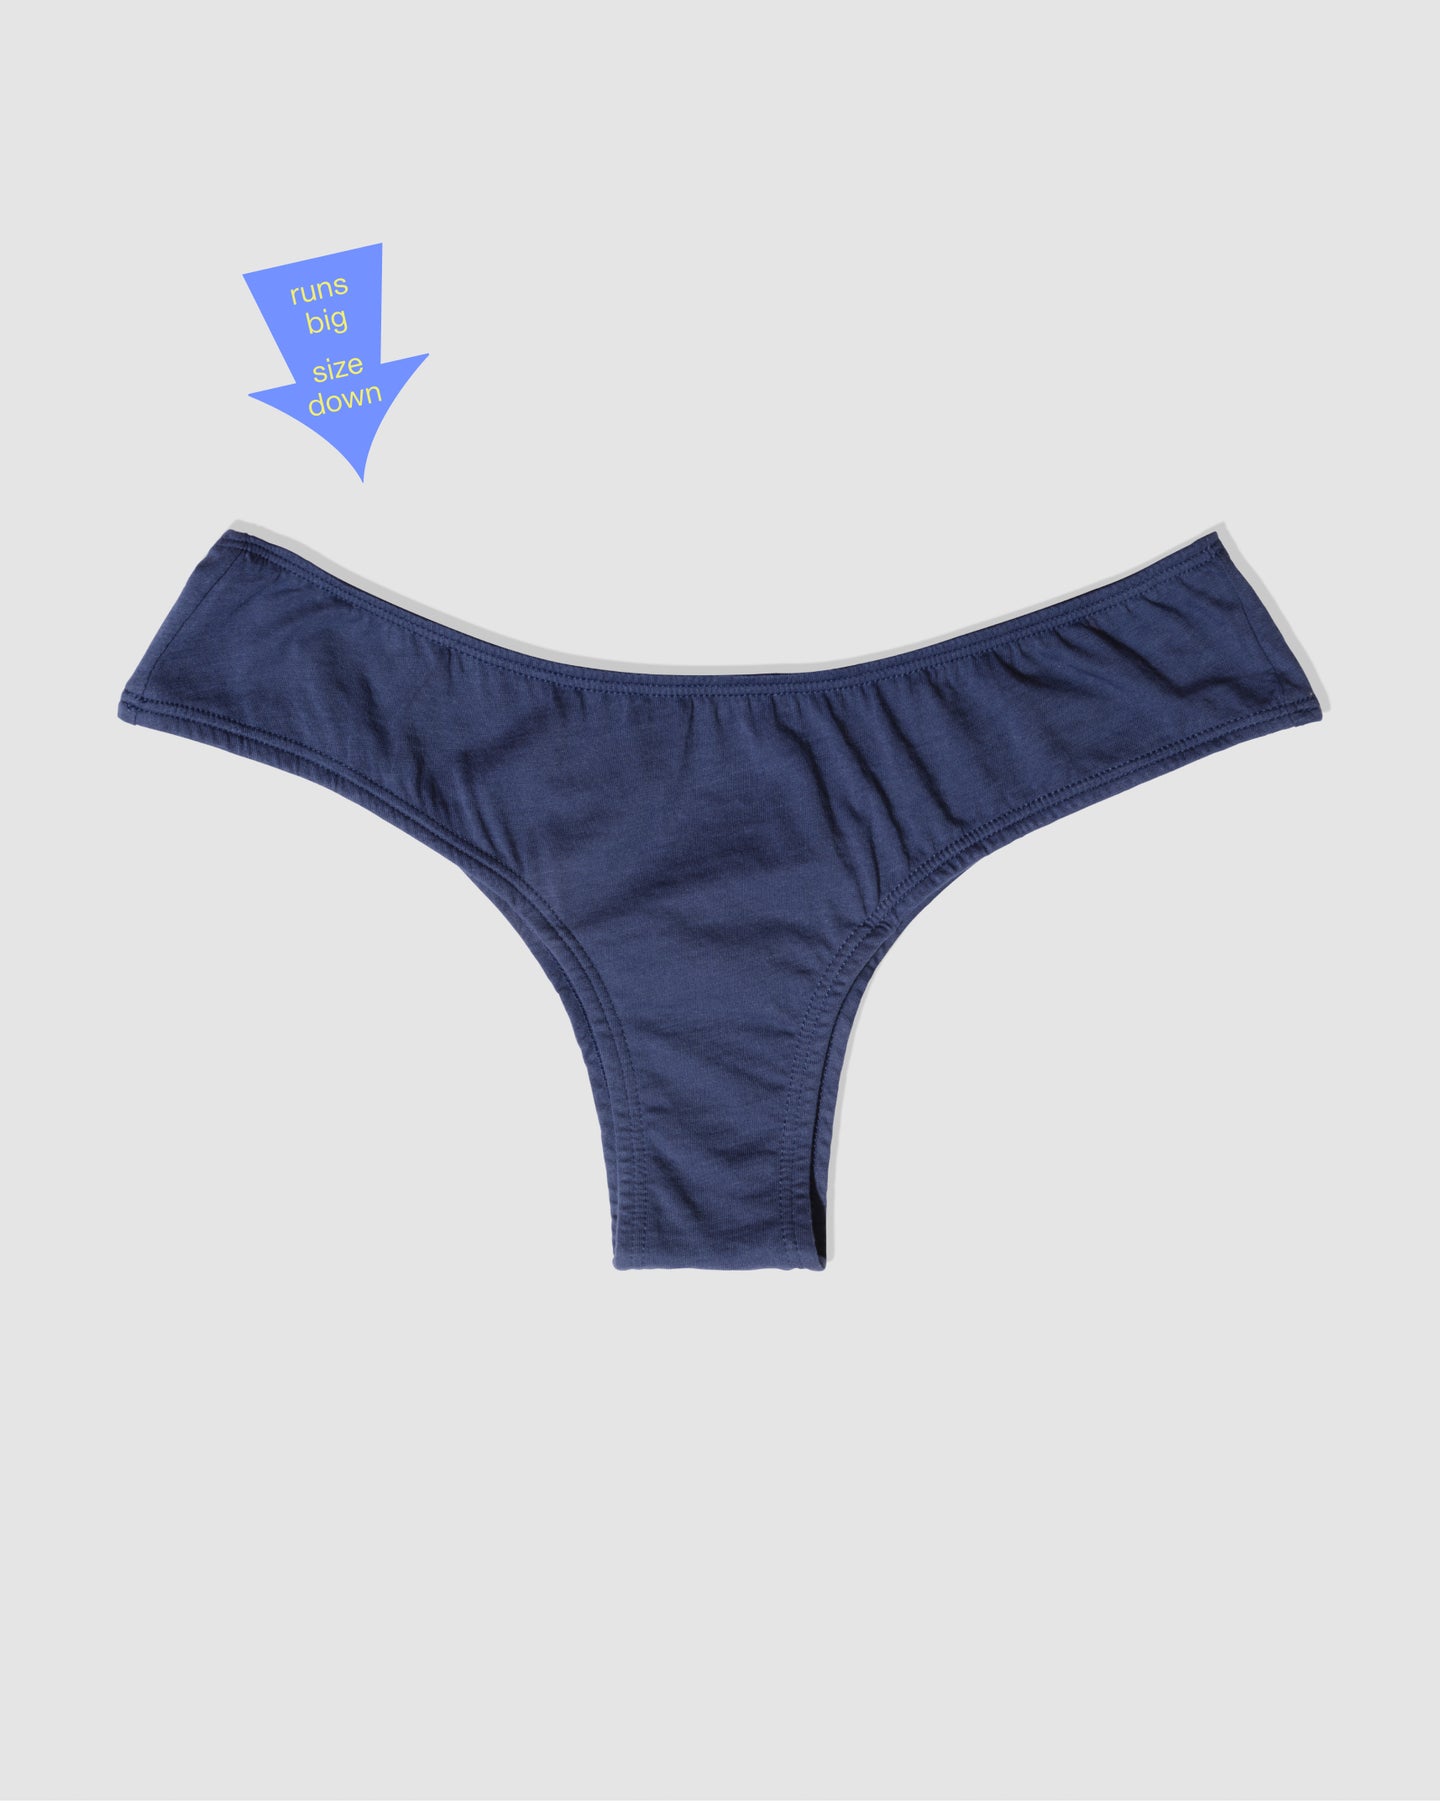 hipster − 100% organic. classic cotton hipster underwear